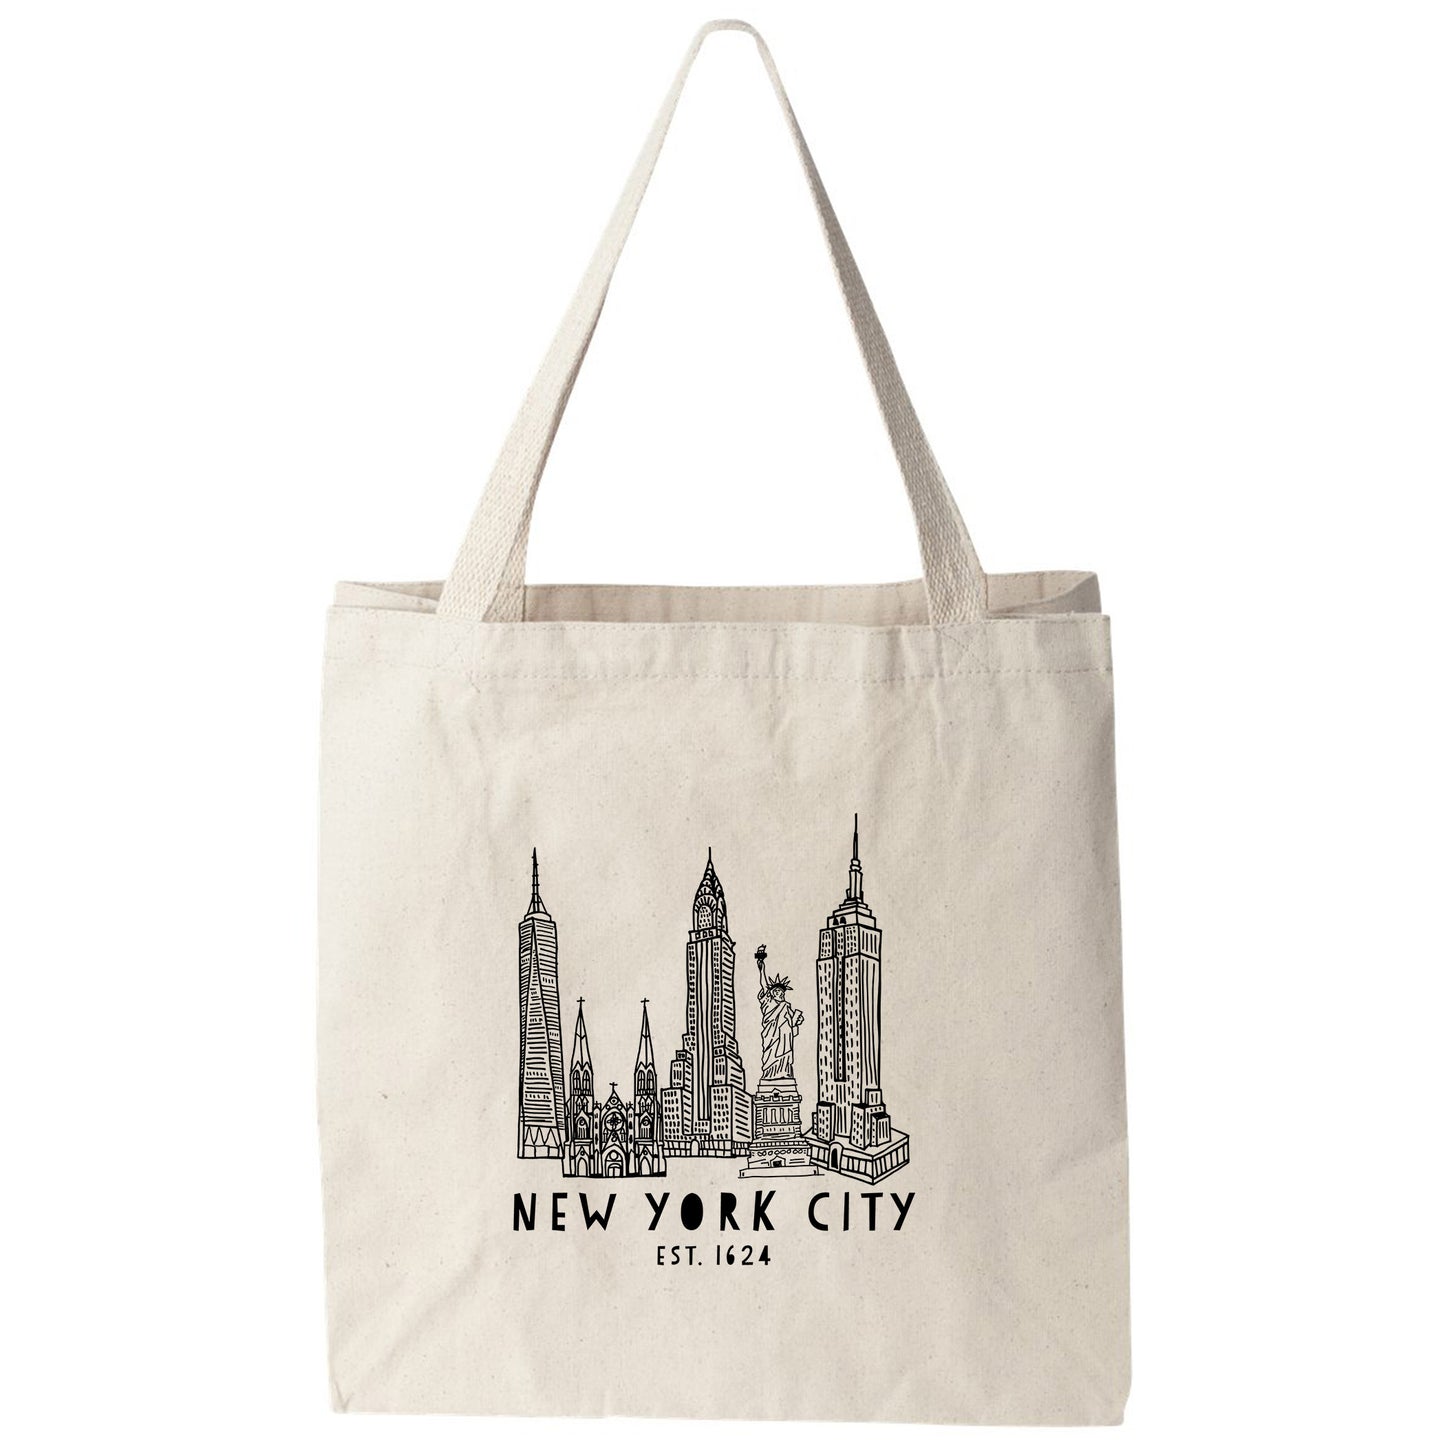 a new york city tote bag on a white background